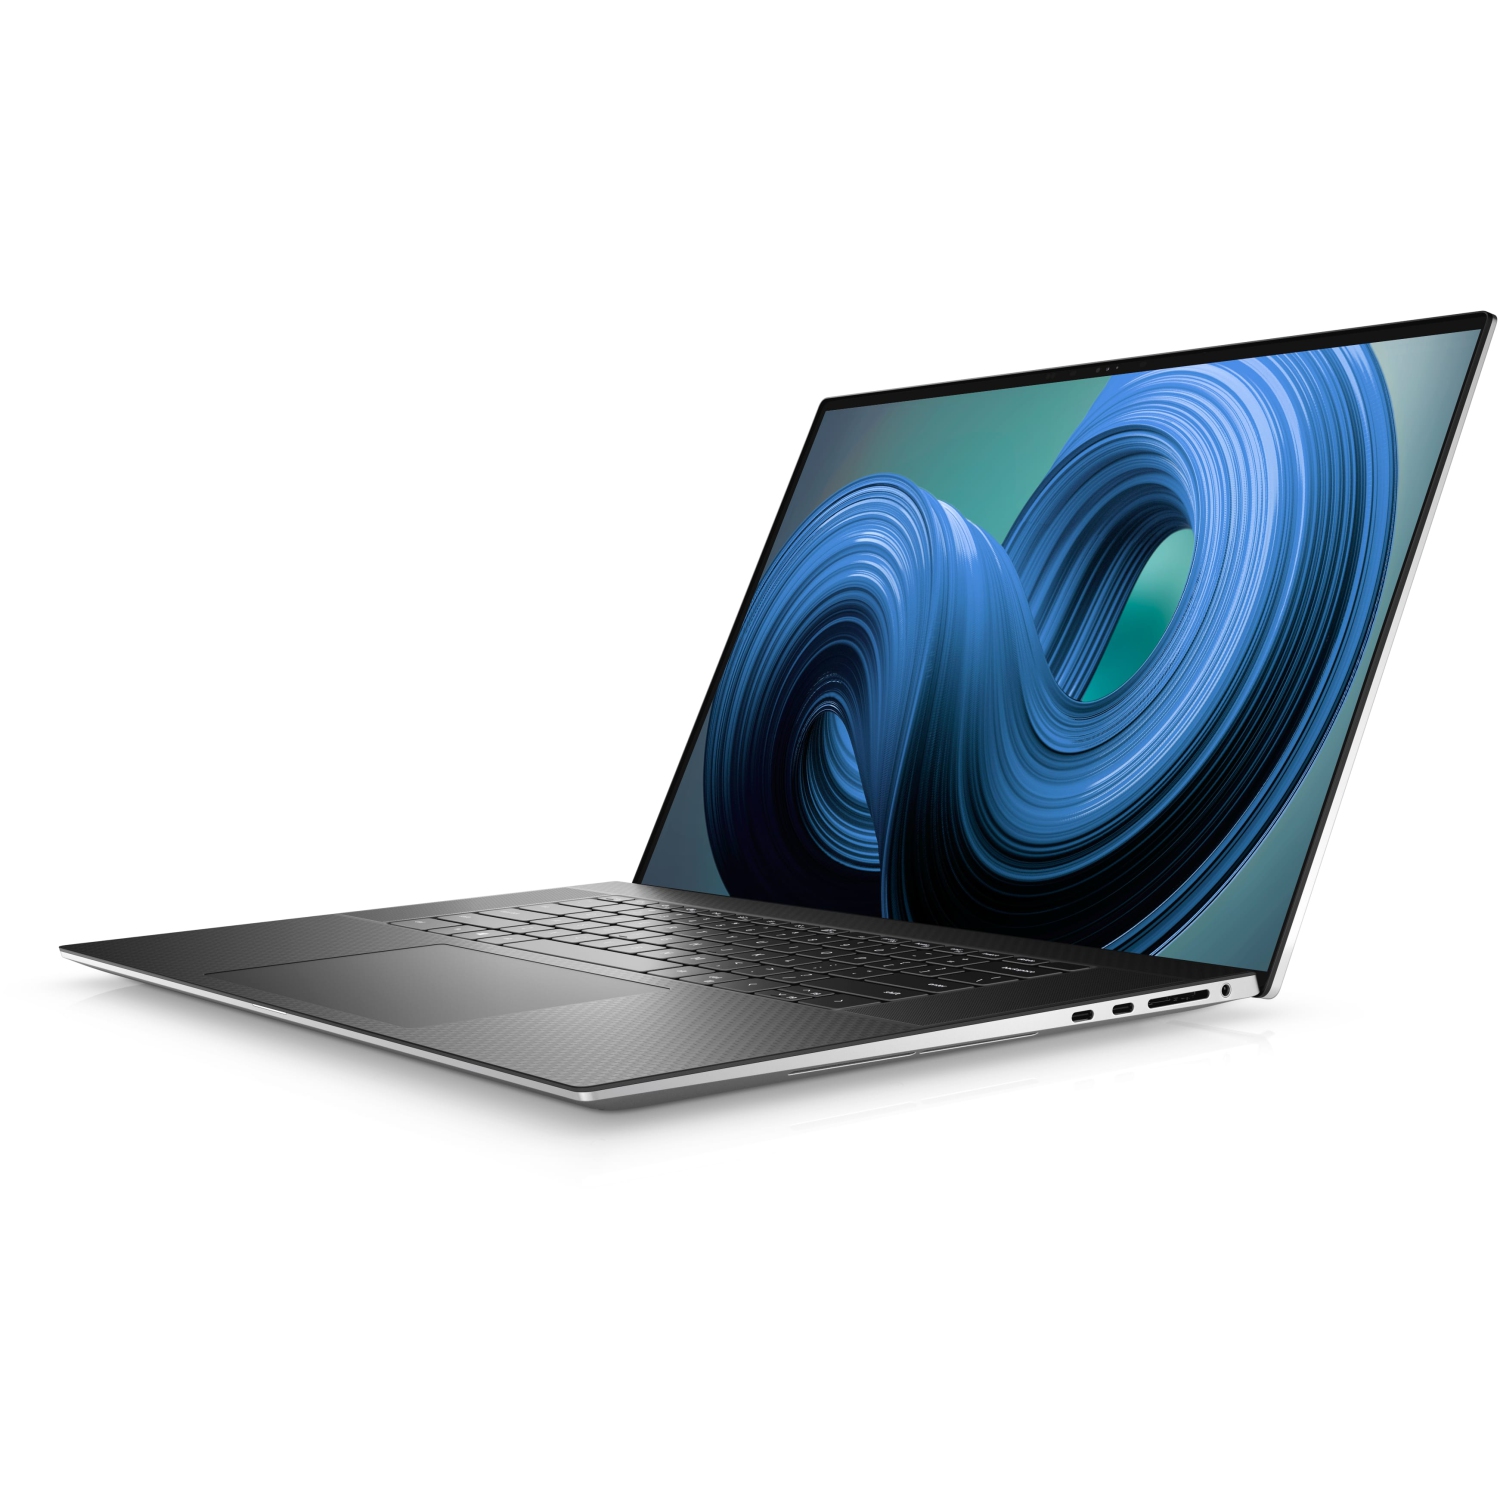 Refurbished (Excellent) – Dell XPS 9720 Laptop (2022) | 17" 4K Touch | Core i7 - 4TB SSD - 16GB RAM - RTX 3050 | 14 Cores @ 4.7 GHz - 12th Gen CPU